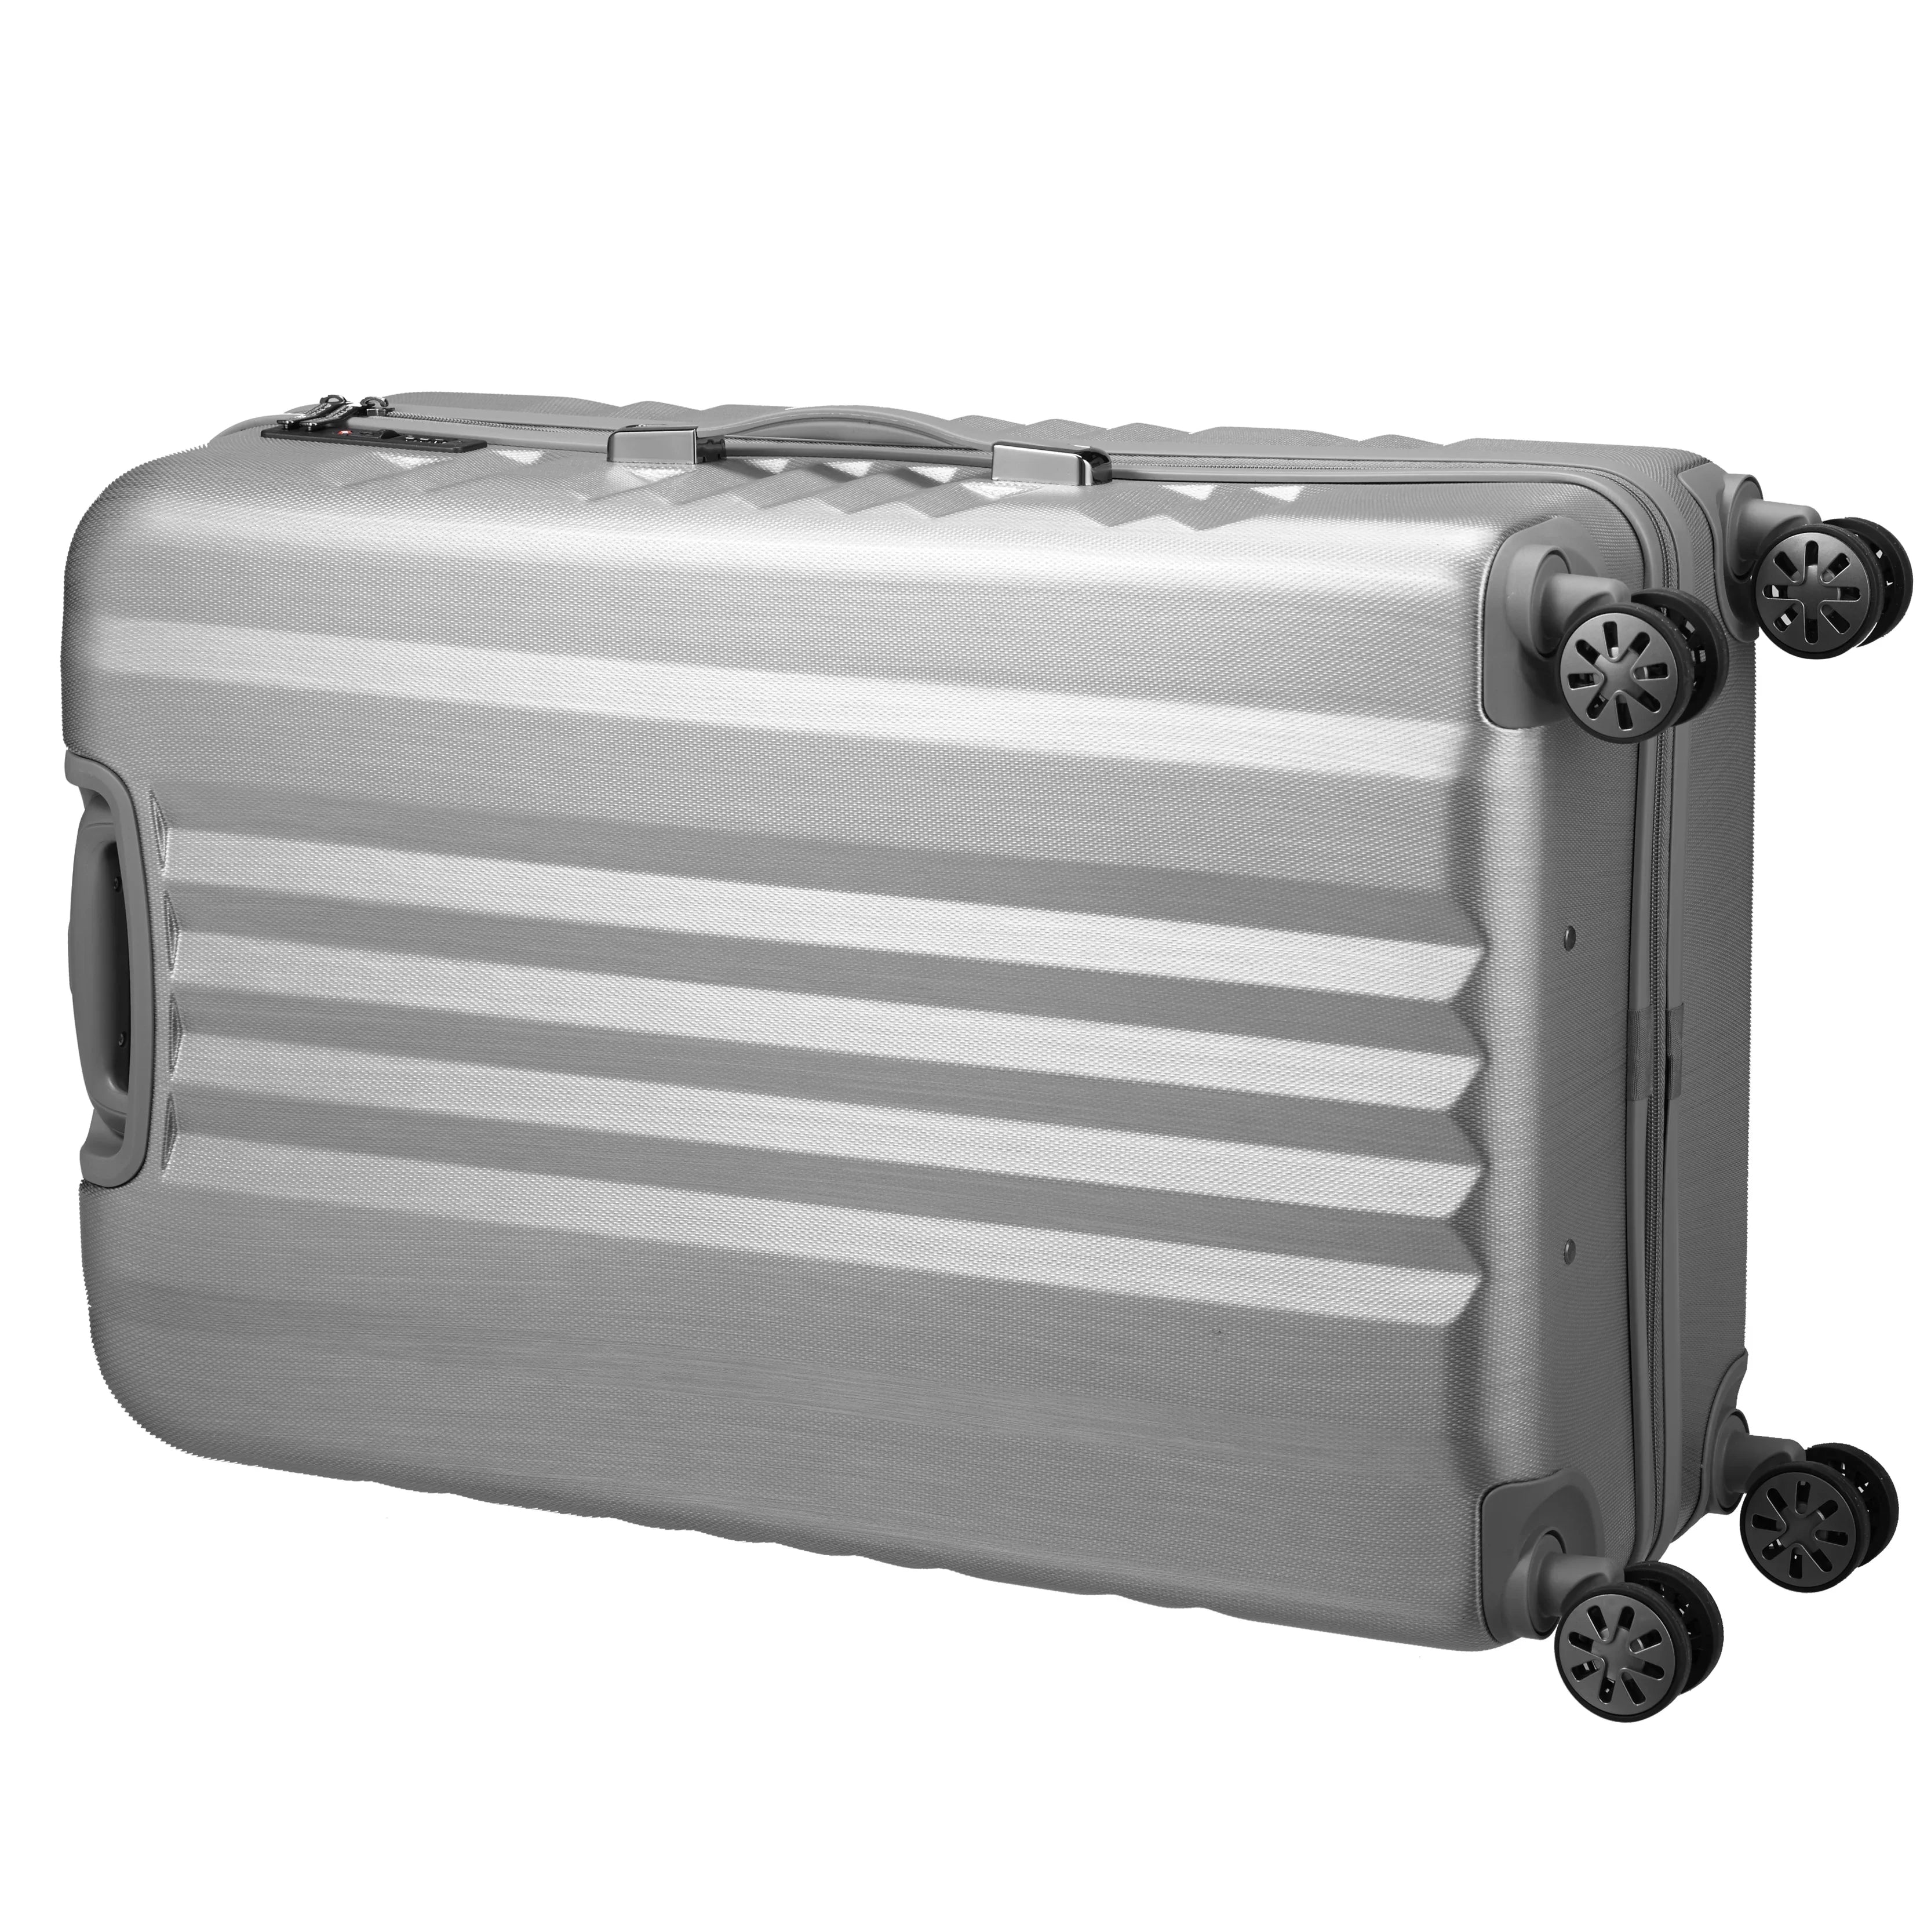 March 15 Trading Fly 4-Rollen Trolley 65 cm - silver brushed